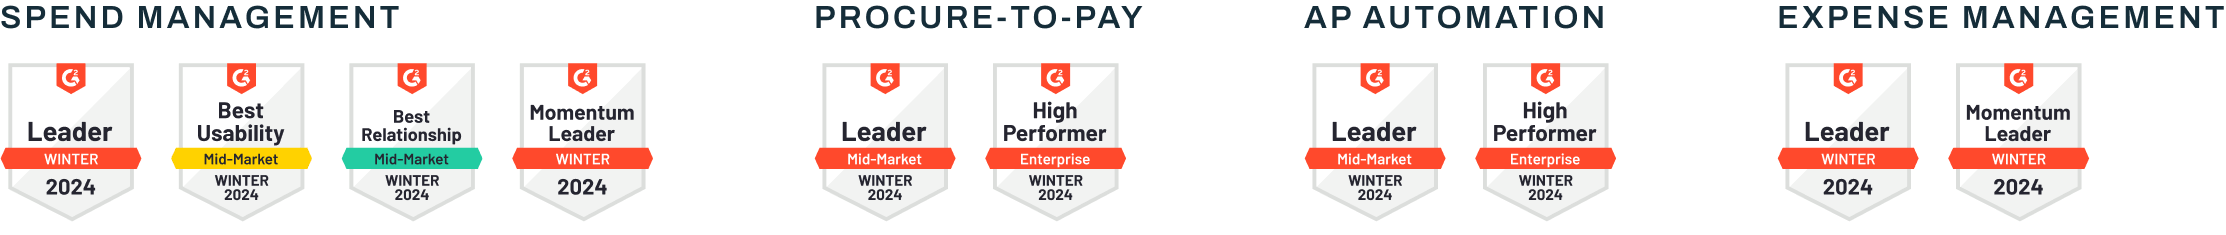 G2 badges for Spend Management, Procure-to-Pay, AP Automation, and Expense Management